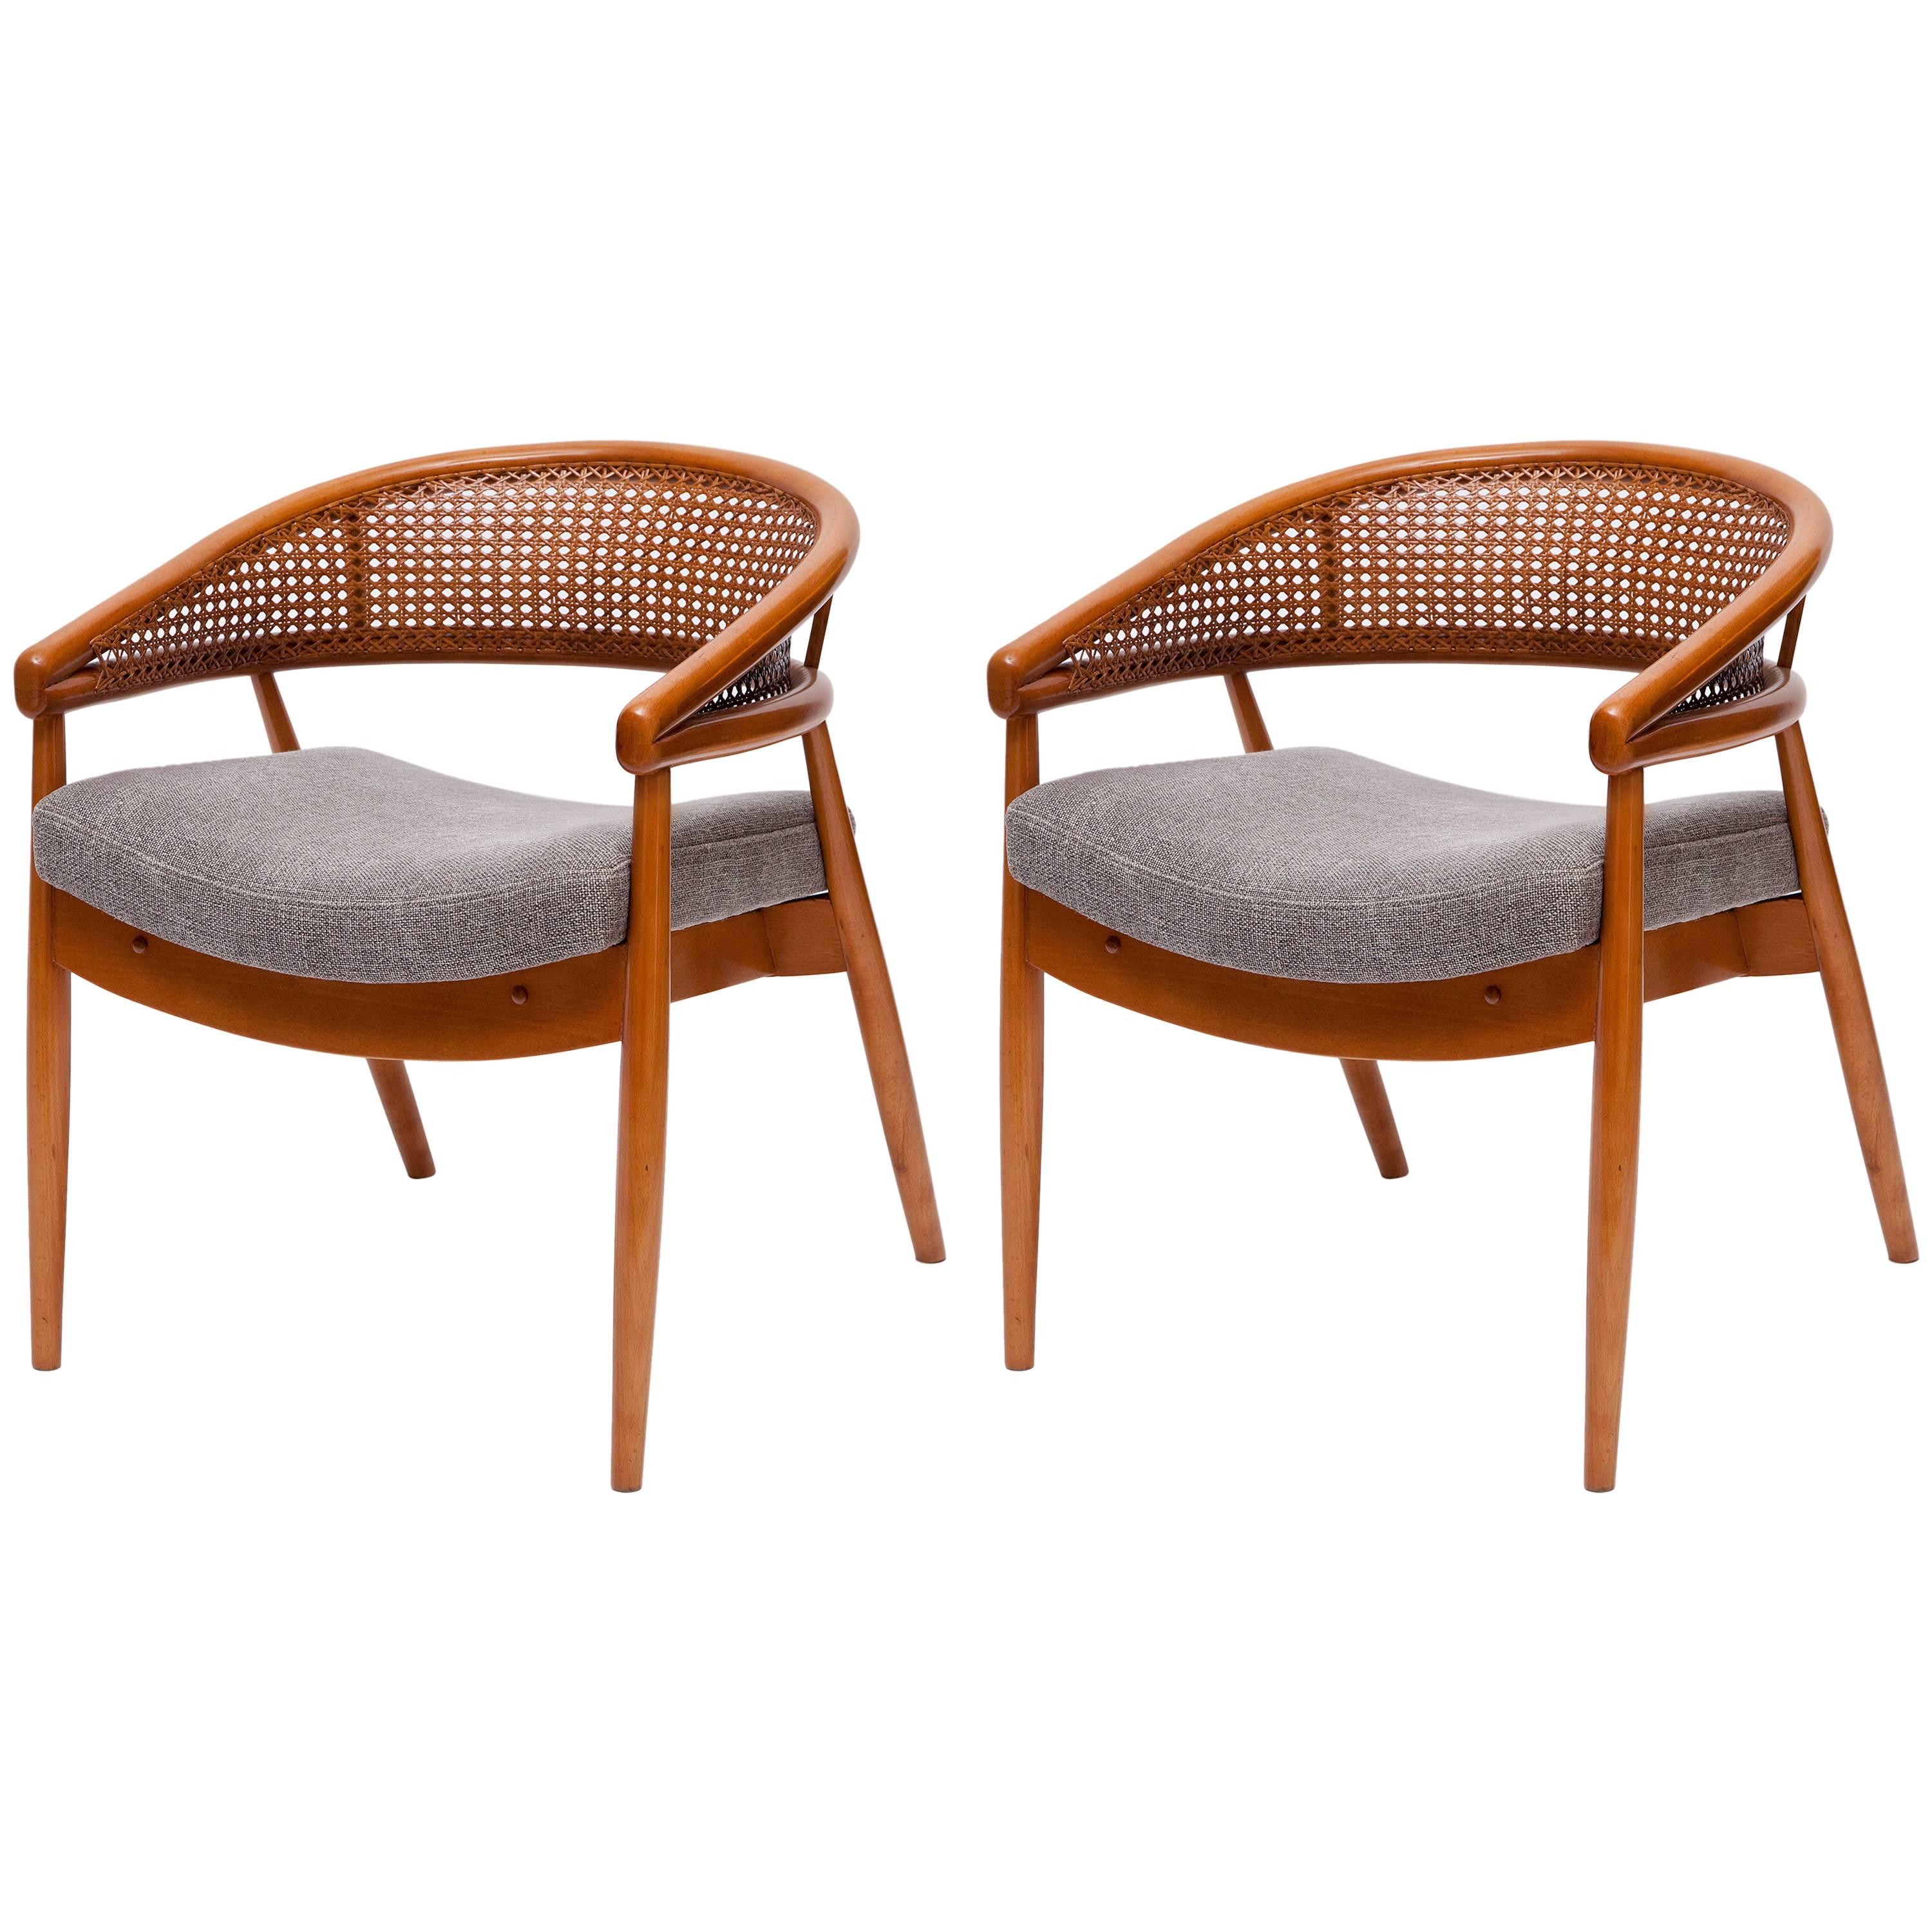 Pair of James Mont "King Cole" Chairs